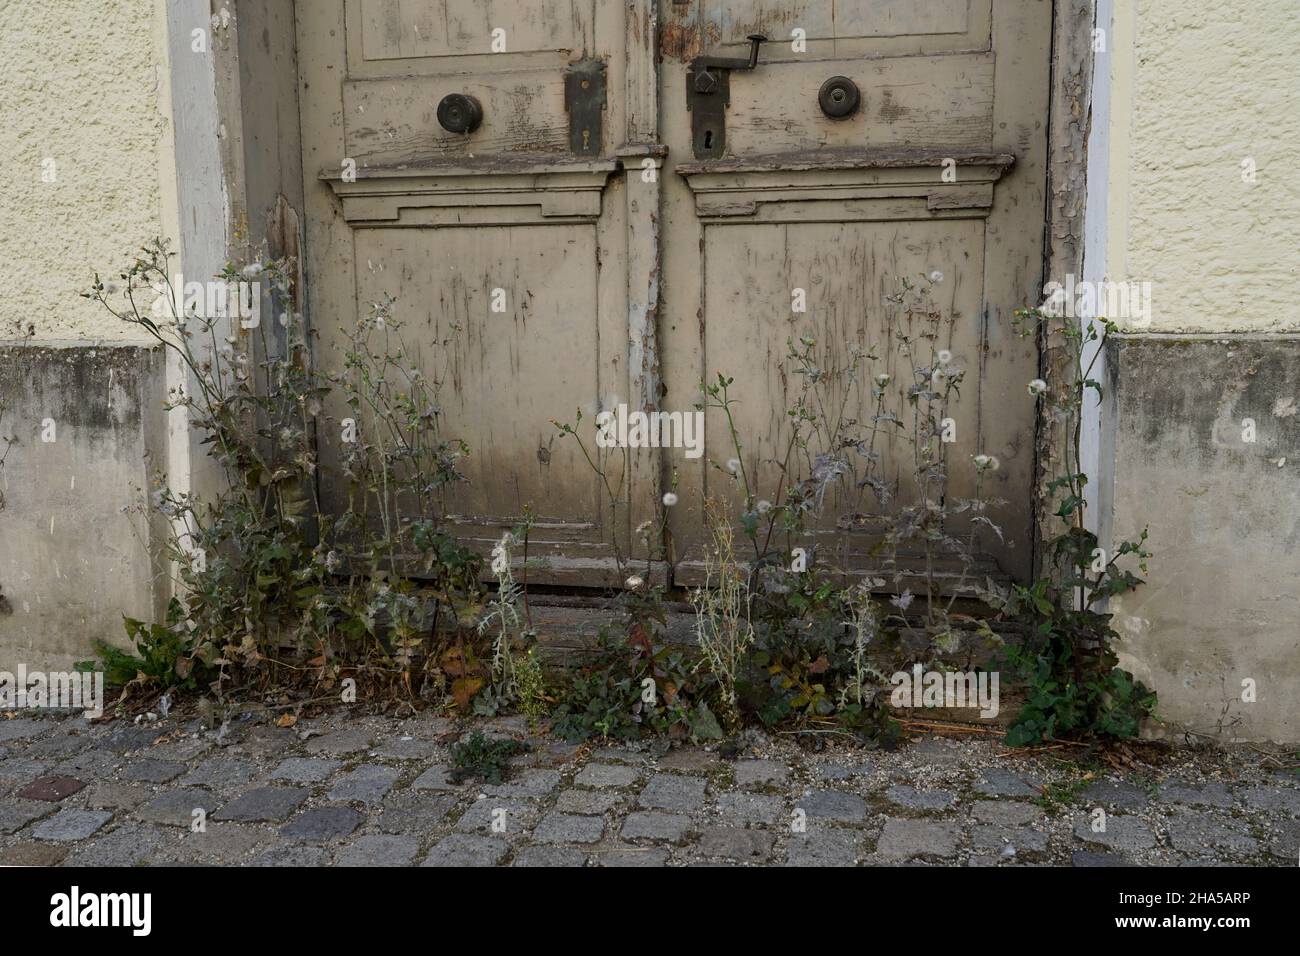 germany,bavaria,altötting district,vacant house,in need of renovation,front door rotted,ingrown,weeds,detail Stock Photo